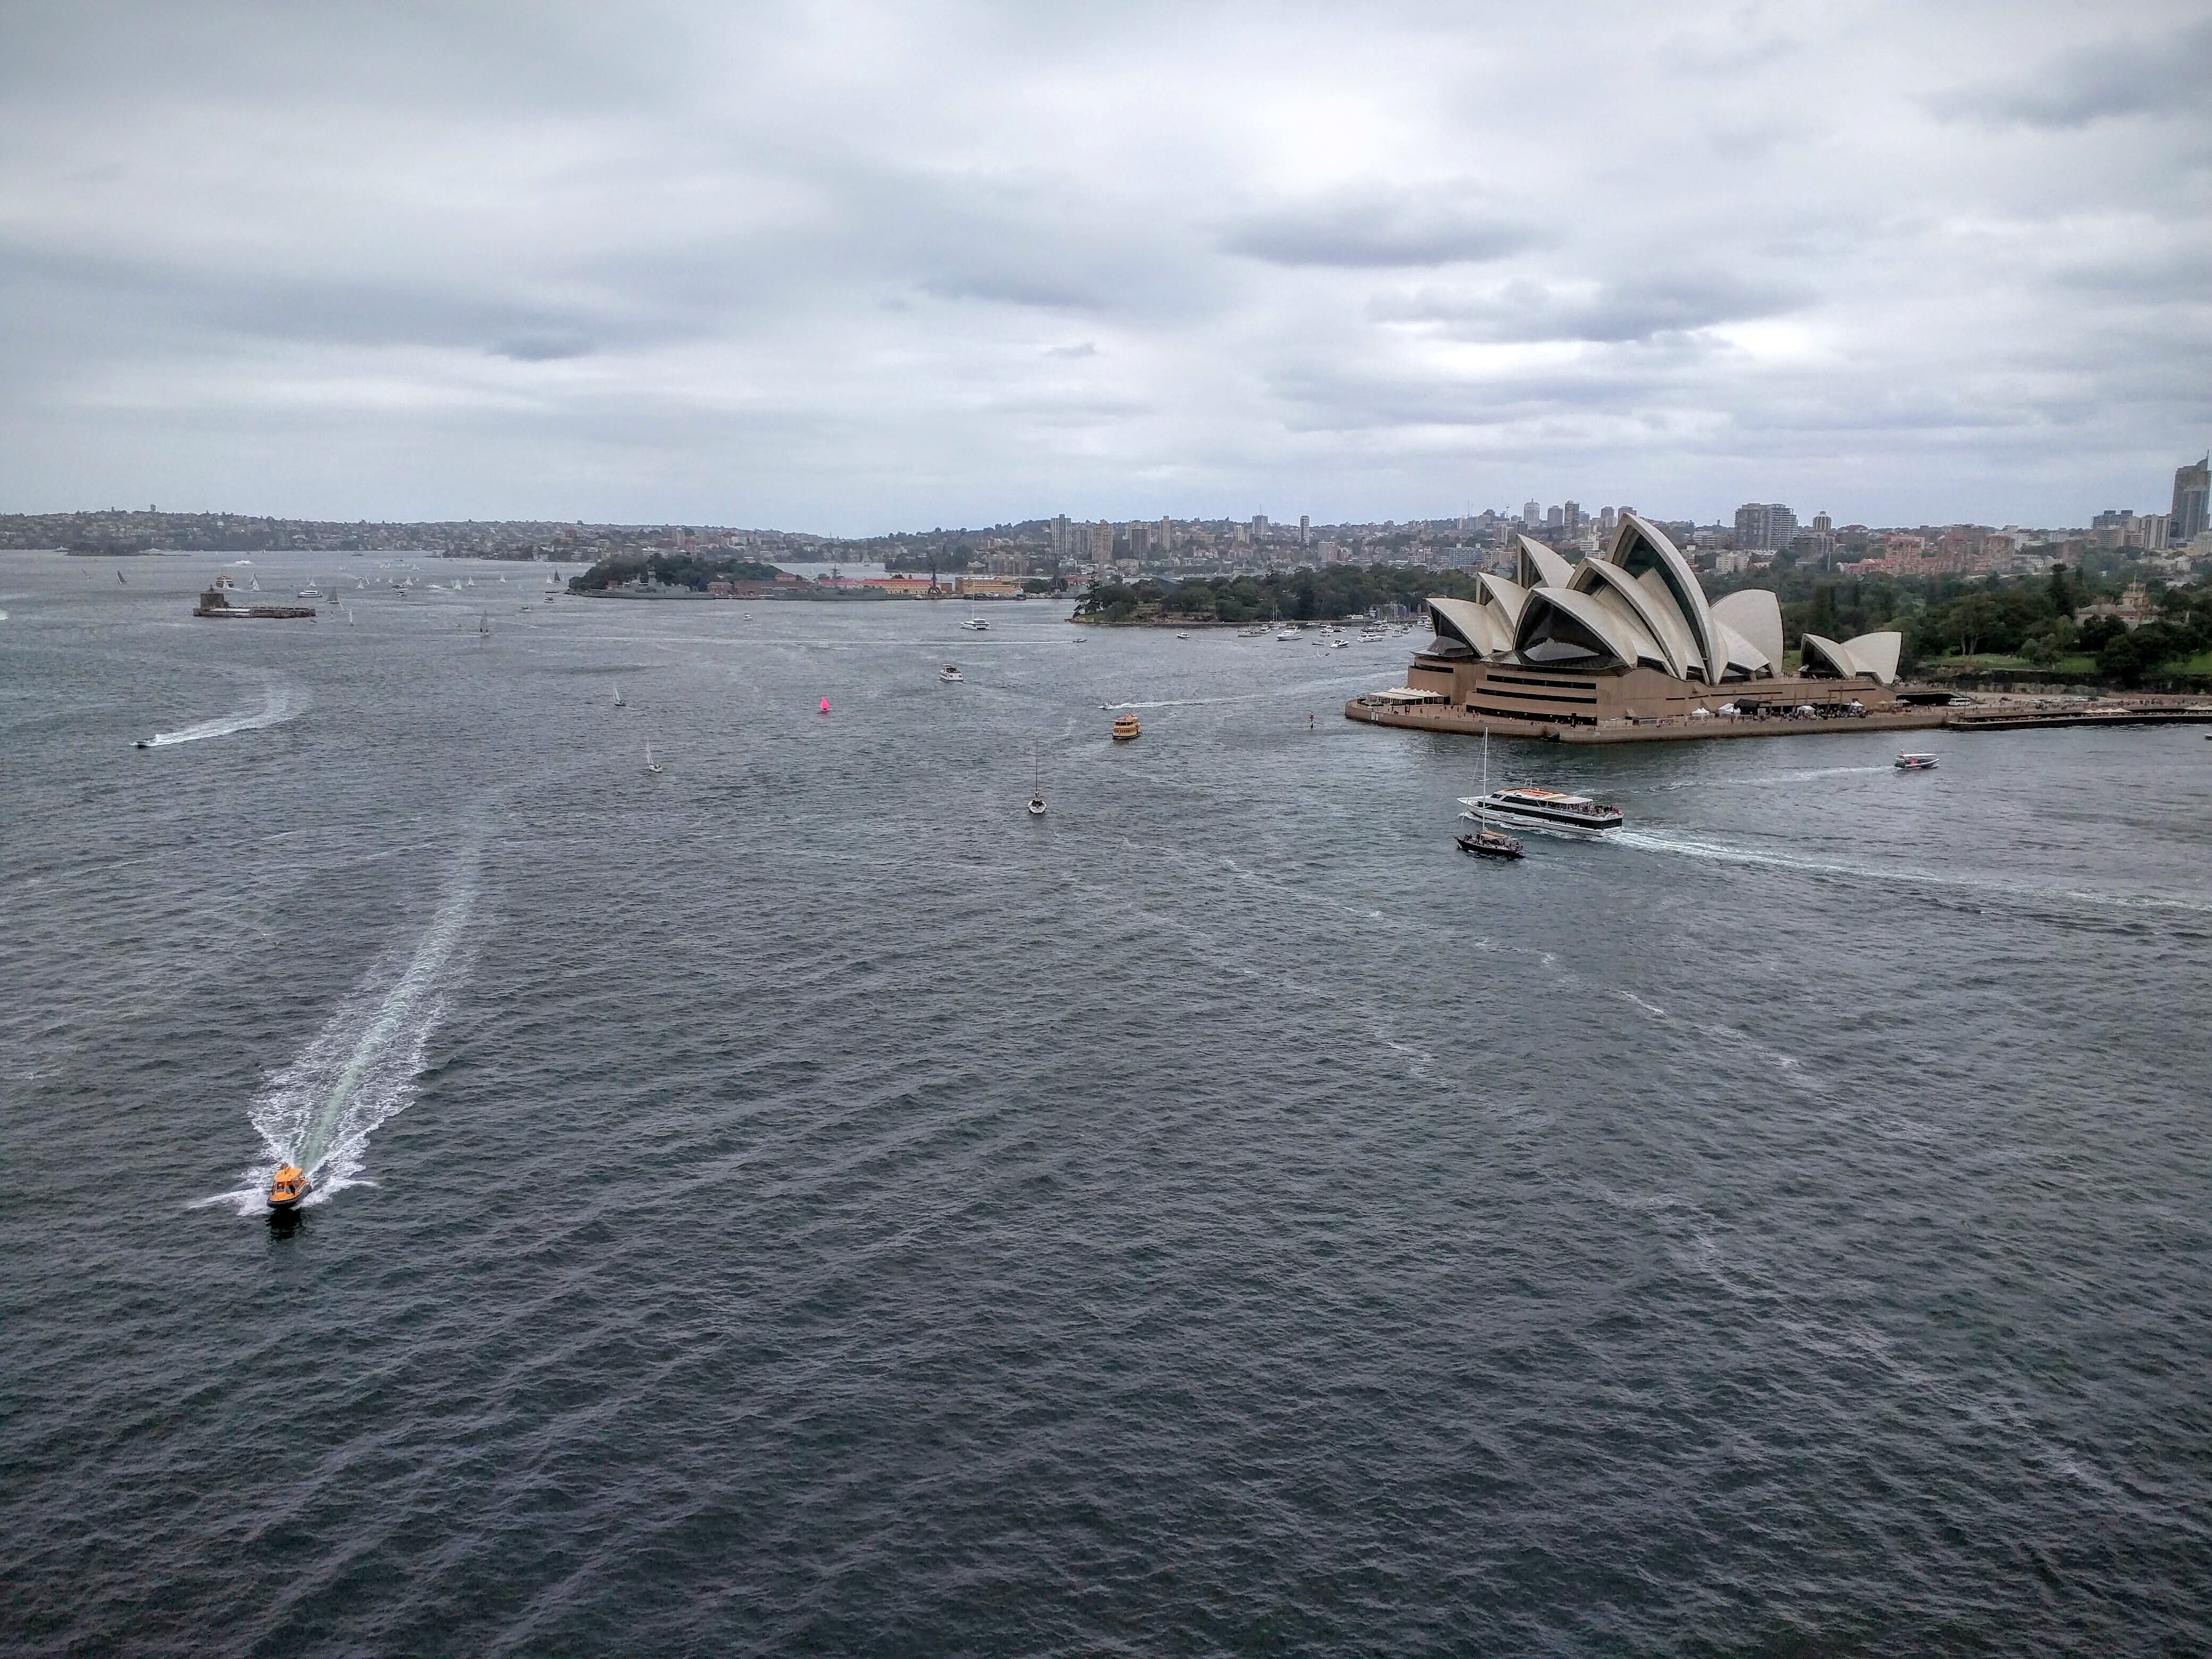 Sydney Opera House viewed from the walkway of the Sydney Harbour Bridge